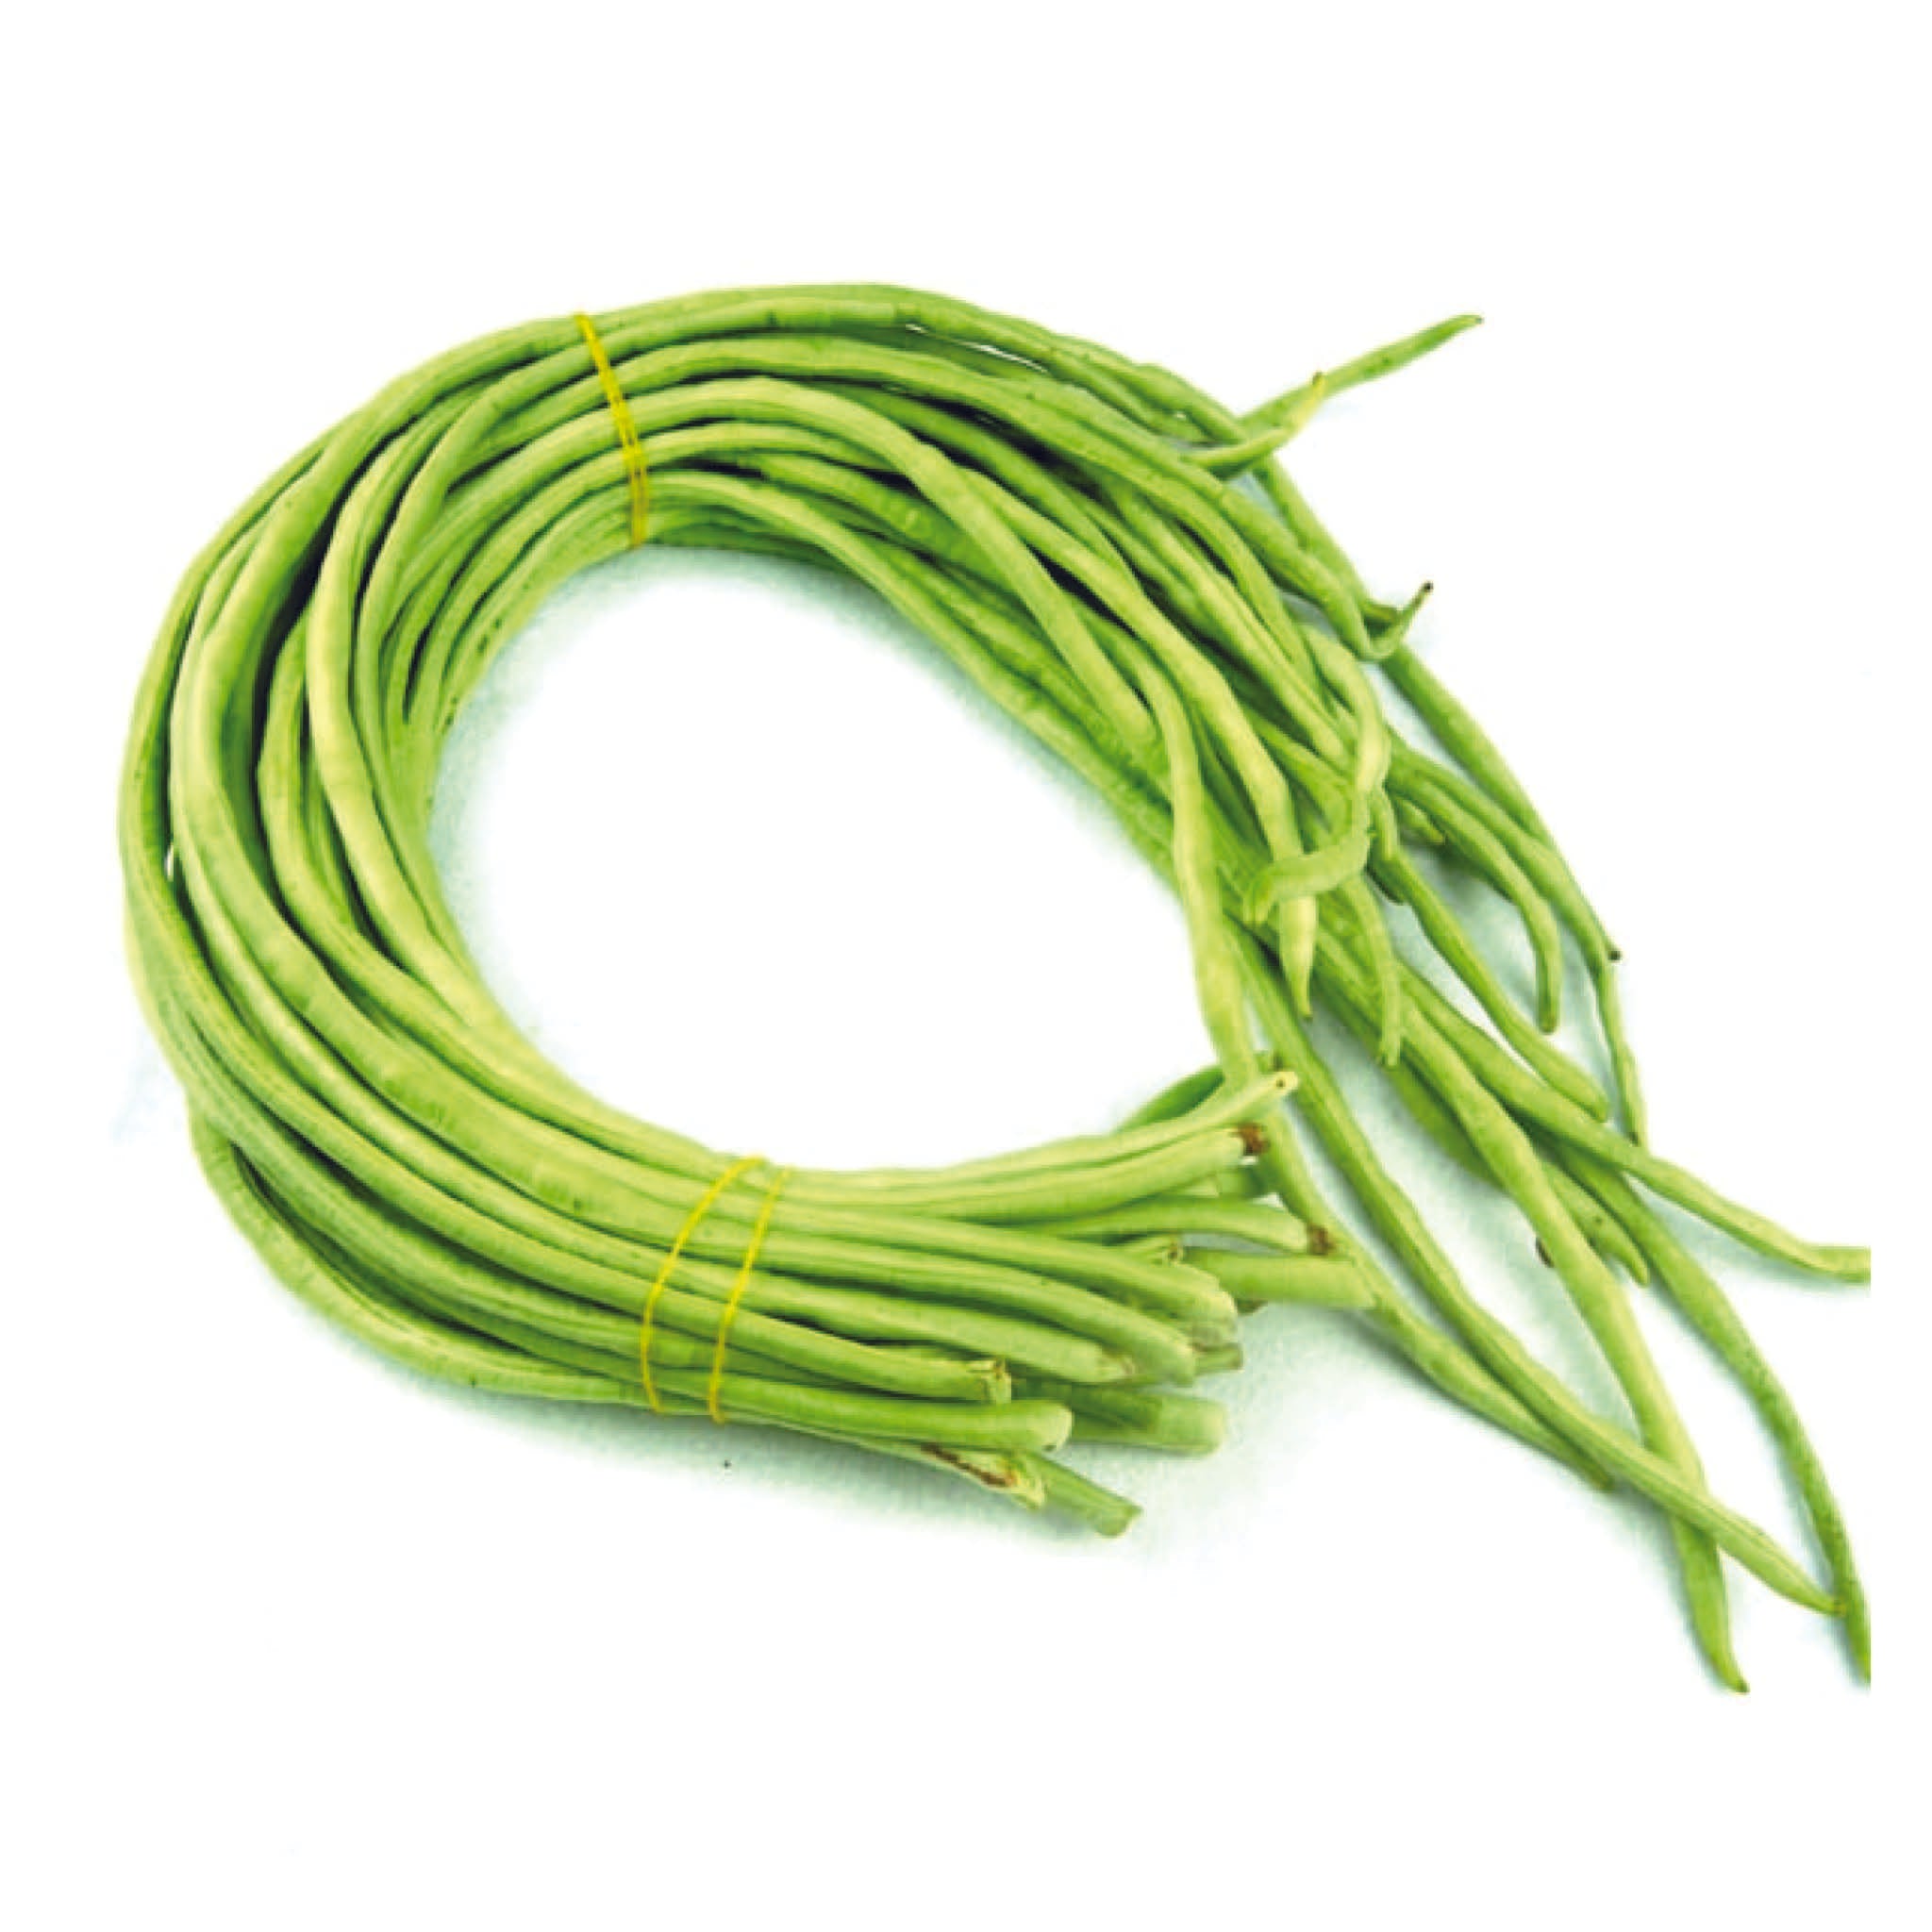 Organic Yard Long Beans Seeds - Open Pollinated